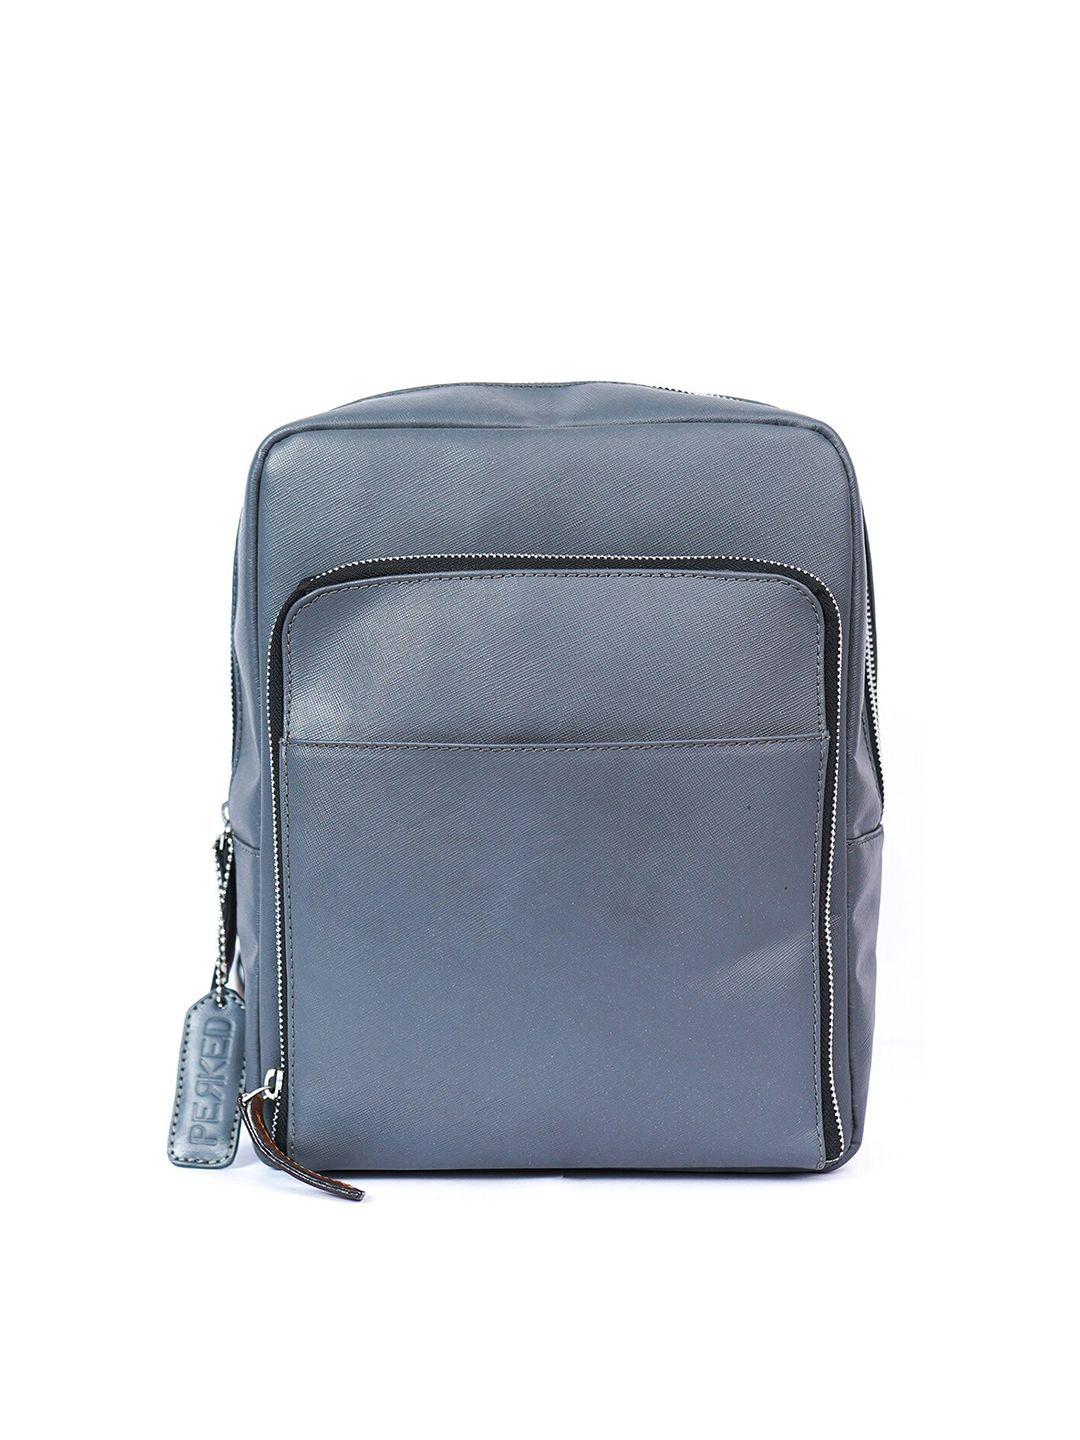 perked leather crossbody backpack with compression straps